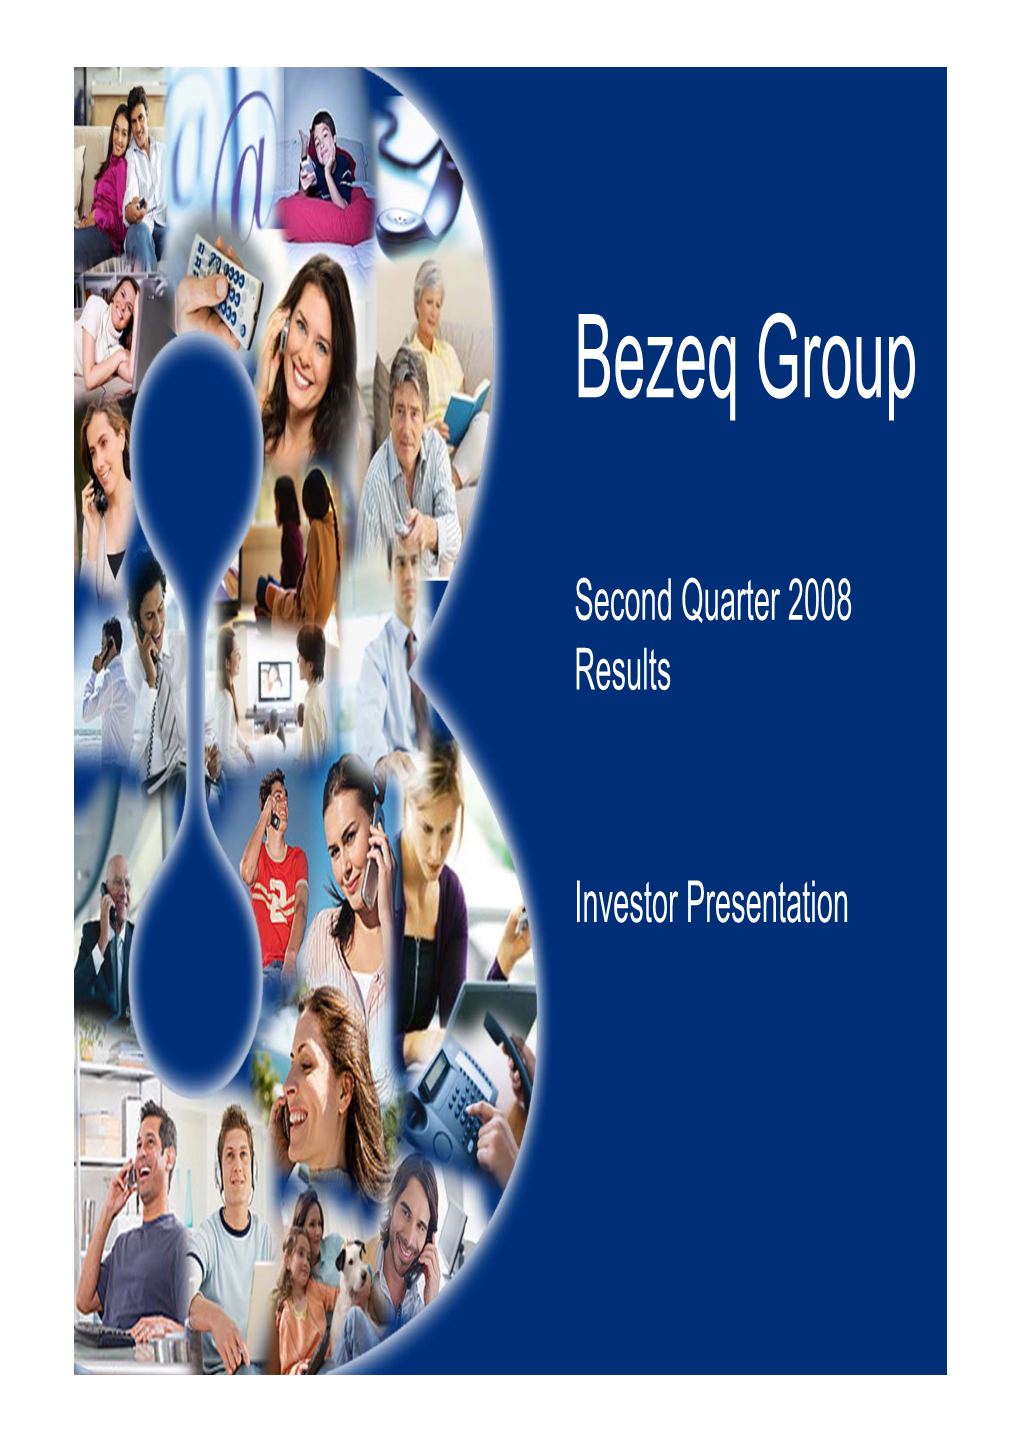 Bezeq International Overview Leader in the ISP and ILD Markets in Israel with Growing Operations in the Enterprise Market